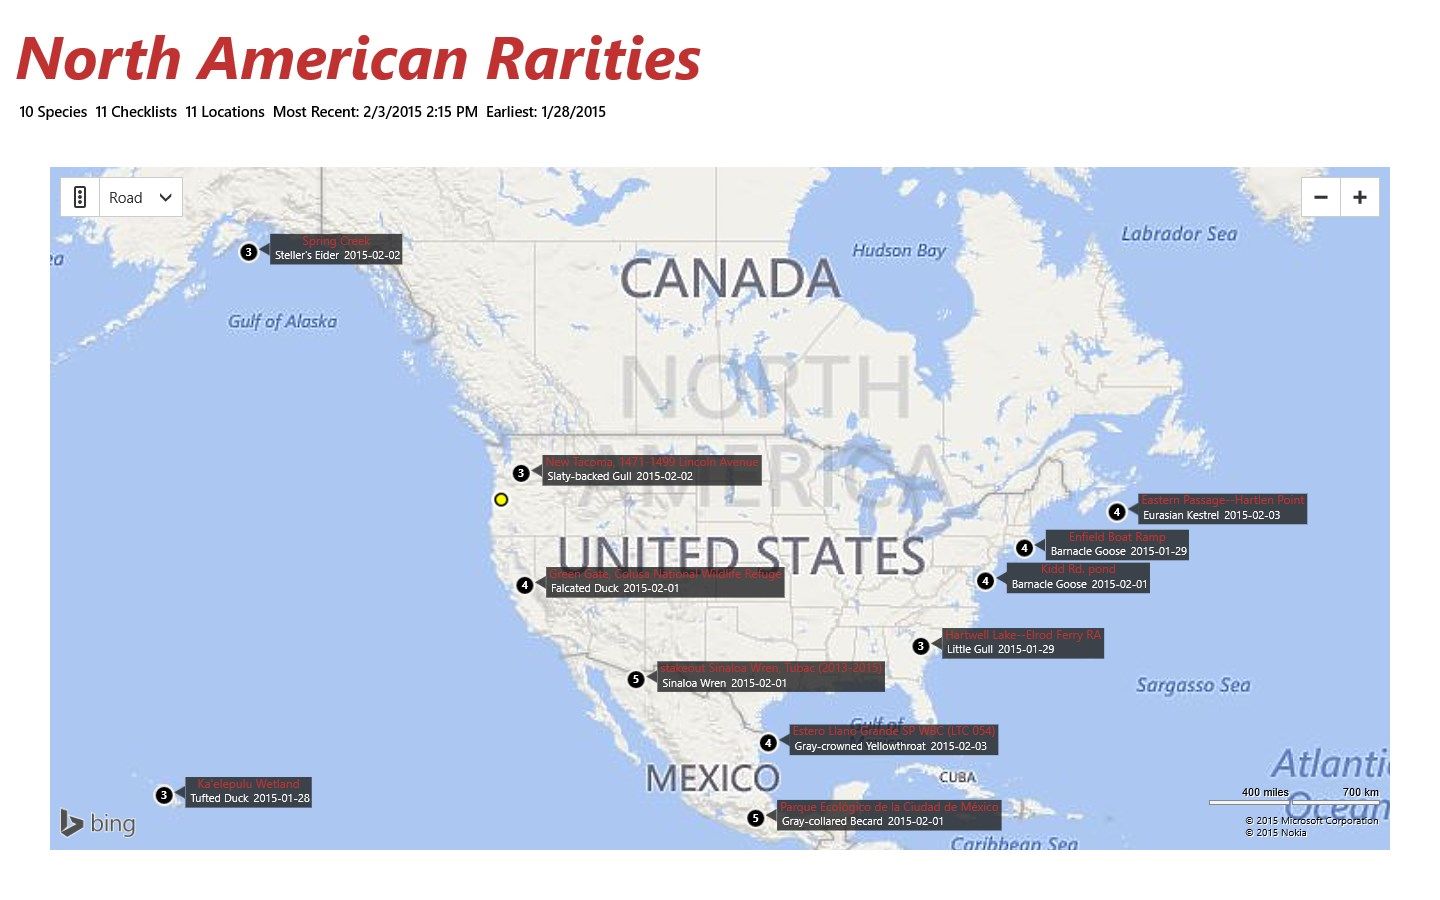 See locations where rare birds were found throughout North America.